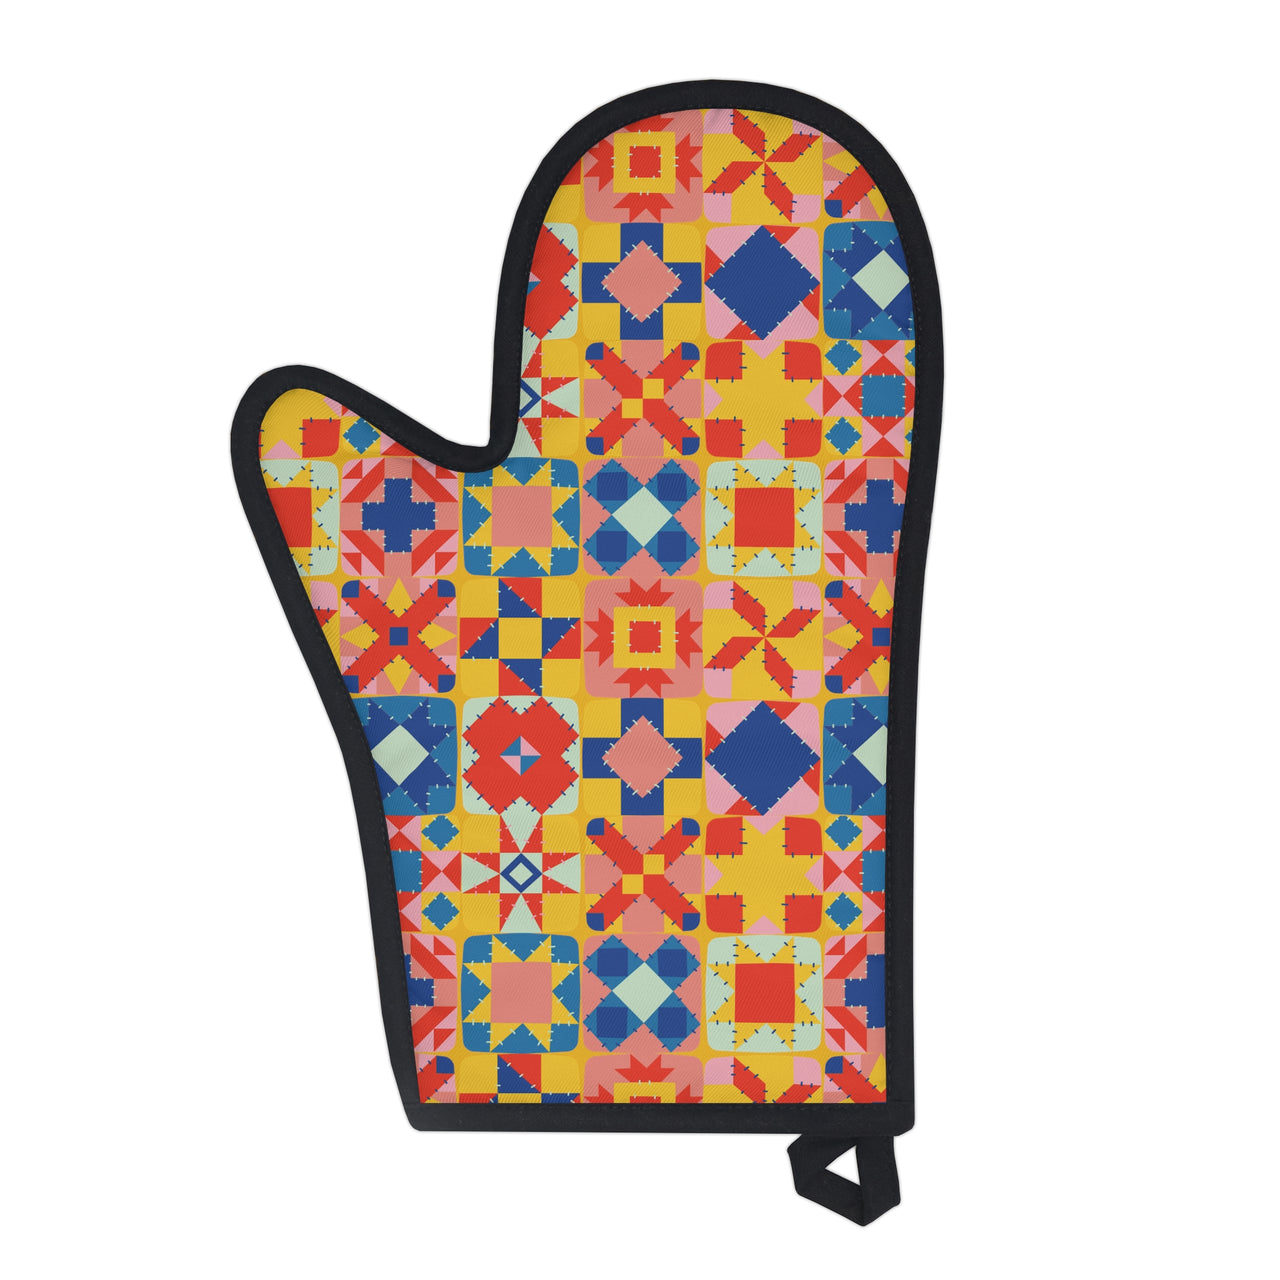 Colorful Patchwork Oven Glove